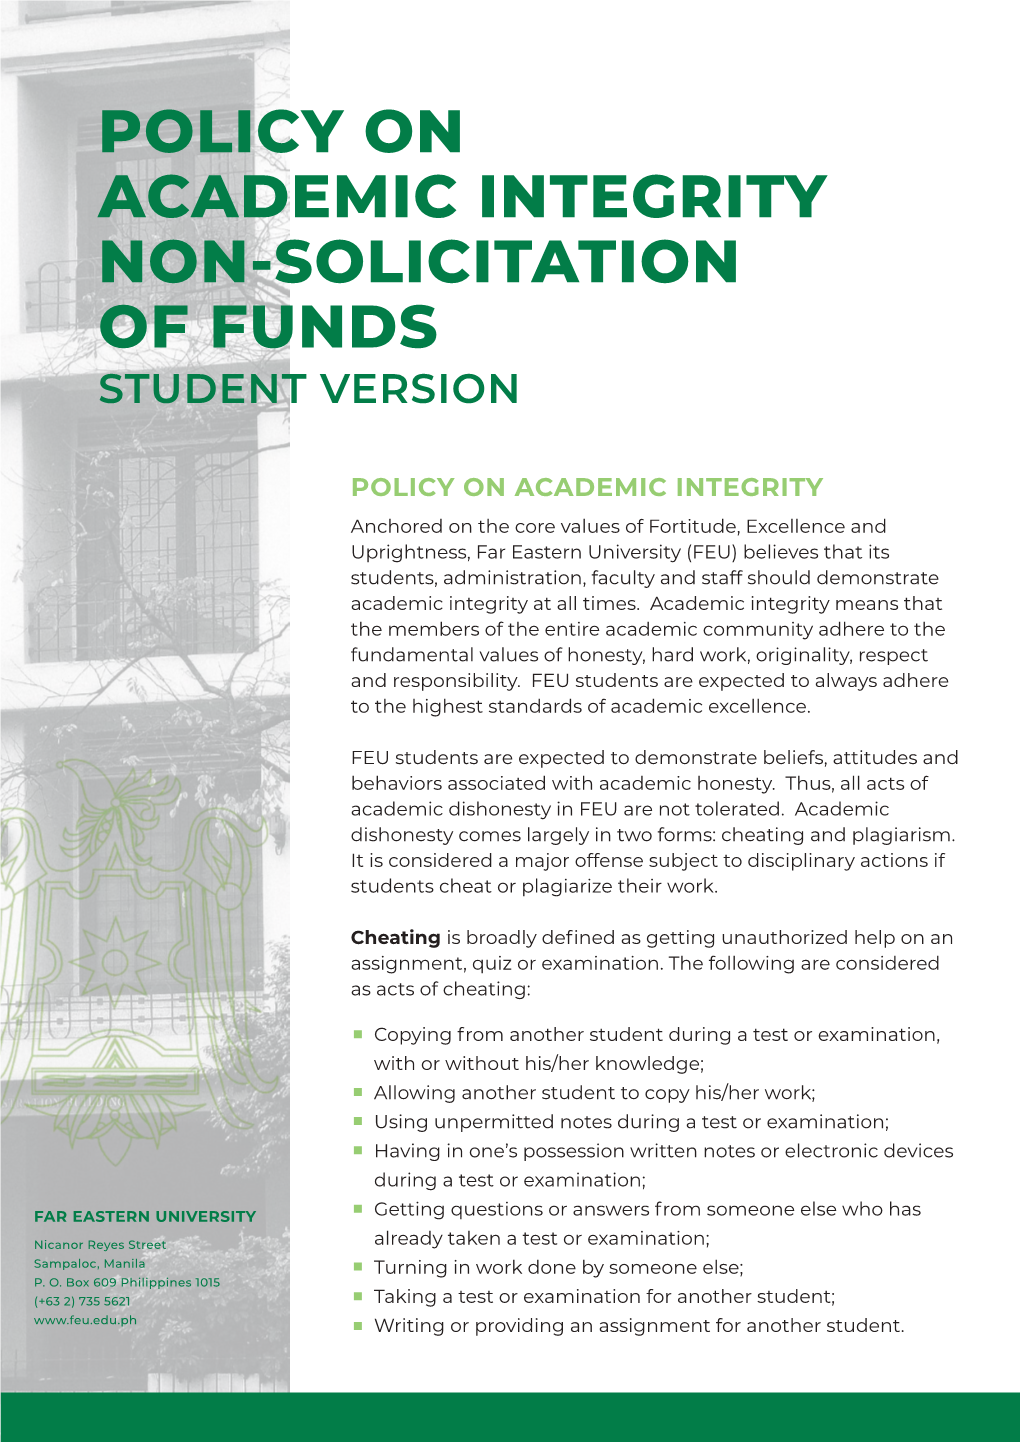 Policy on Academic Integrity and Non